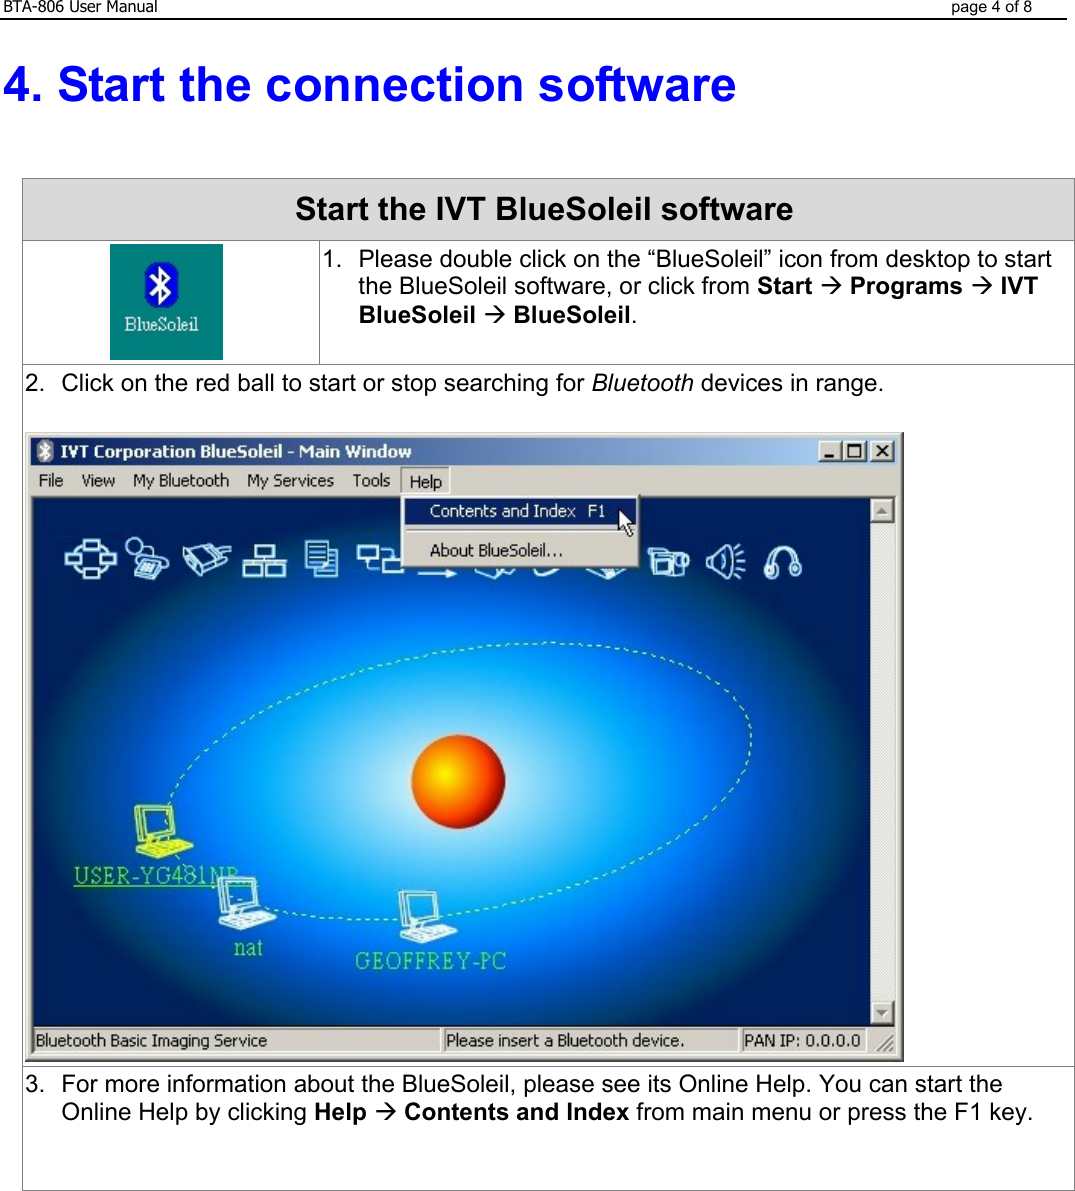 BTA-806 User Manual  page 4 of 8  4. Start the connection software    Start the IVT BlueSoleil software    1.  Please double click on the “BlueSoleil” icon from desktop to start the BlueSoleil software, or click from Start Æ Programs Æ IVT BlueSoleil Æ BlueSoleil. 2.  Click on the red ball to start or stop searching for Bluetooth devices in range.   3.  For more information about the BlueSoleil, please see its Online Help. You can start the Online Help by clicking Help Æ Contents and Index from main menu or press the F1 key.    